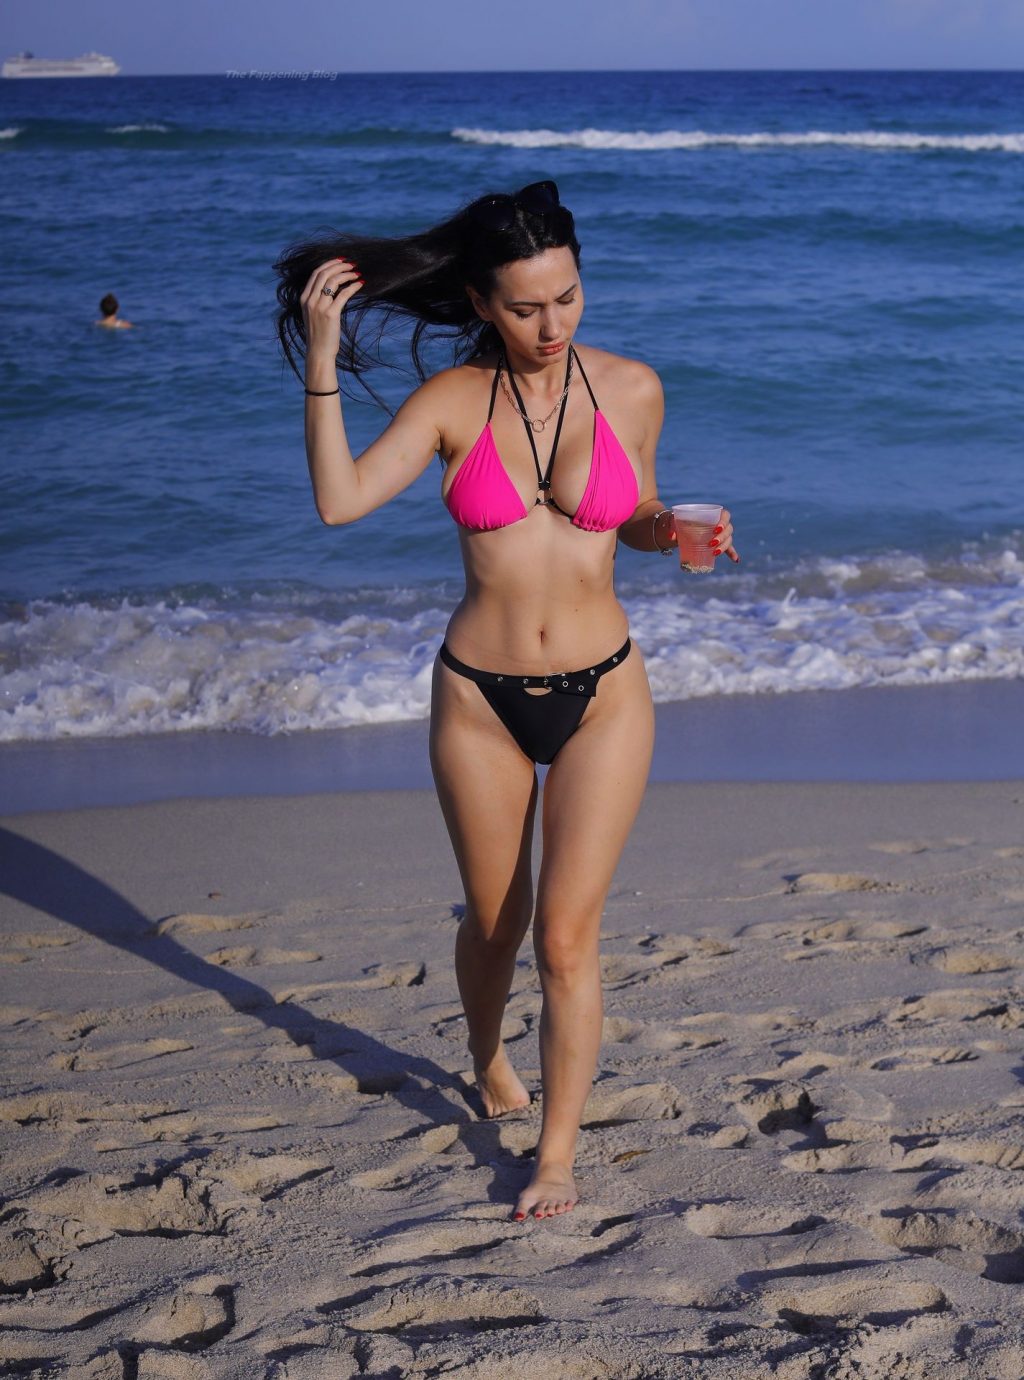 Iva Kovacevic Shows Off Her Sexy Body in a Bikini on the Beach in Miami (29 Photos)